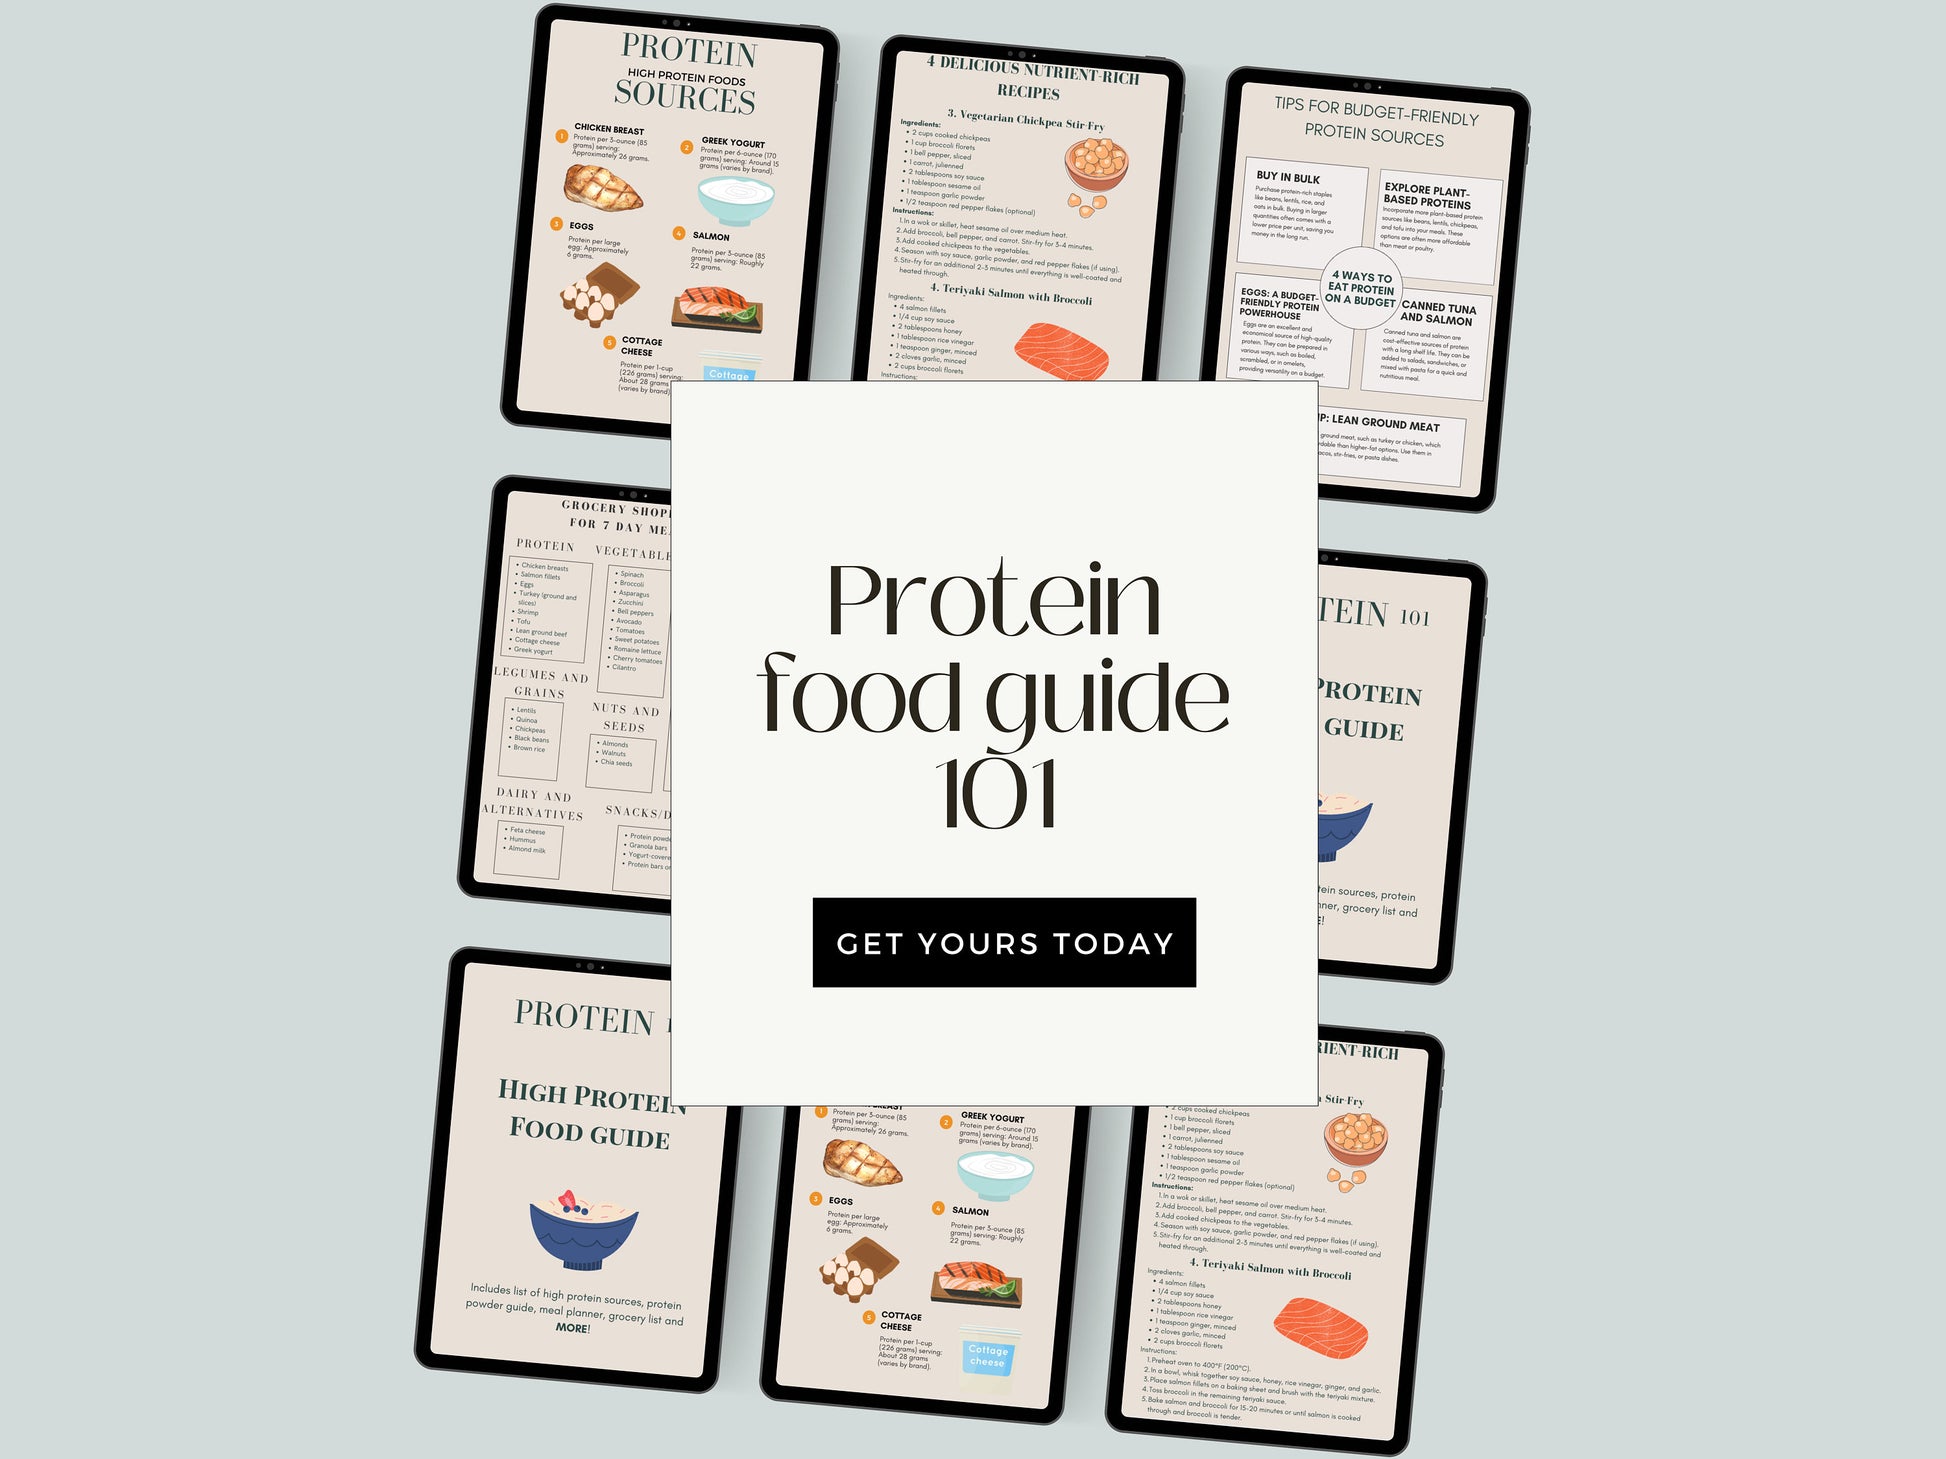 Meal plan and guide for protein, full guide on high protein meals + grocery list. Digital download, budget tips, budget proteins & more!